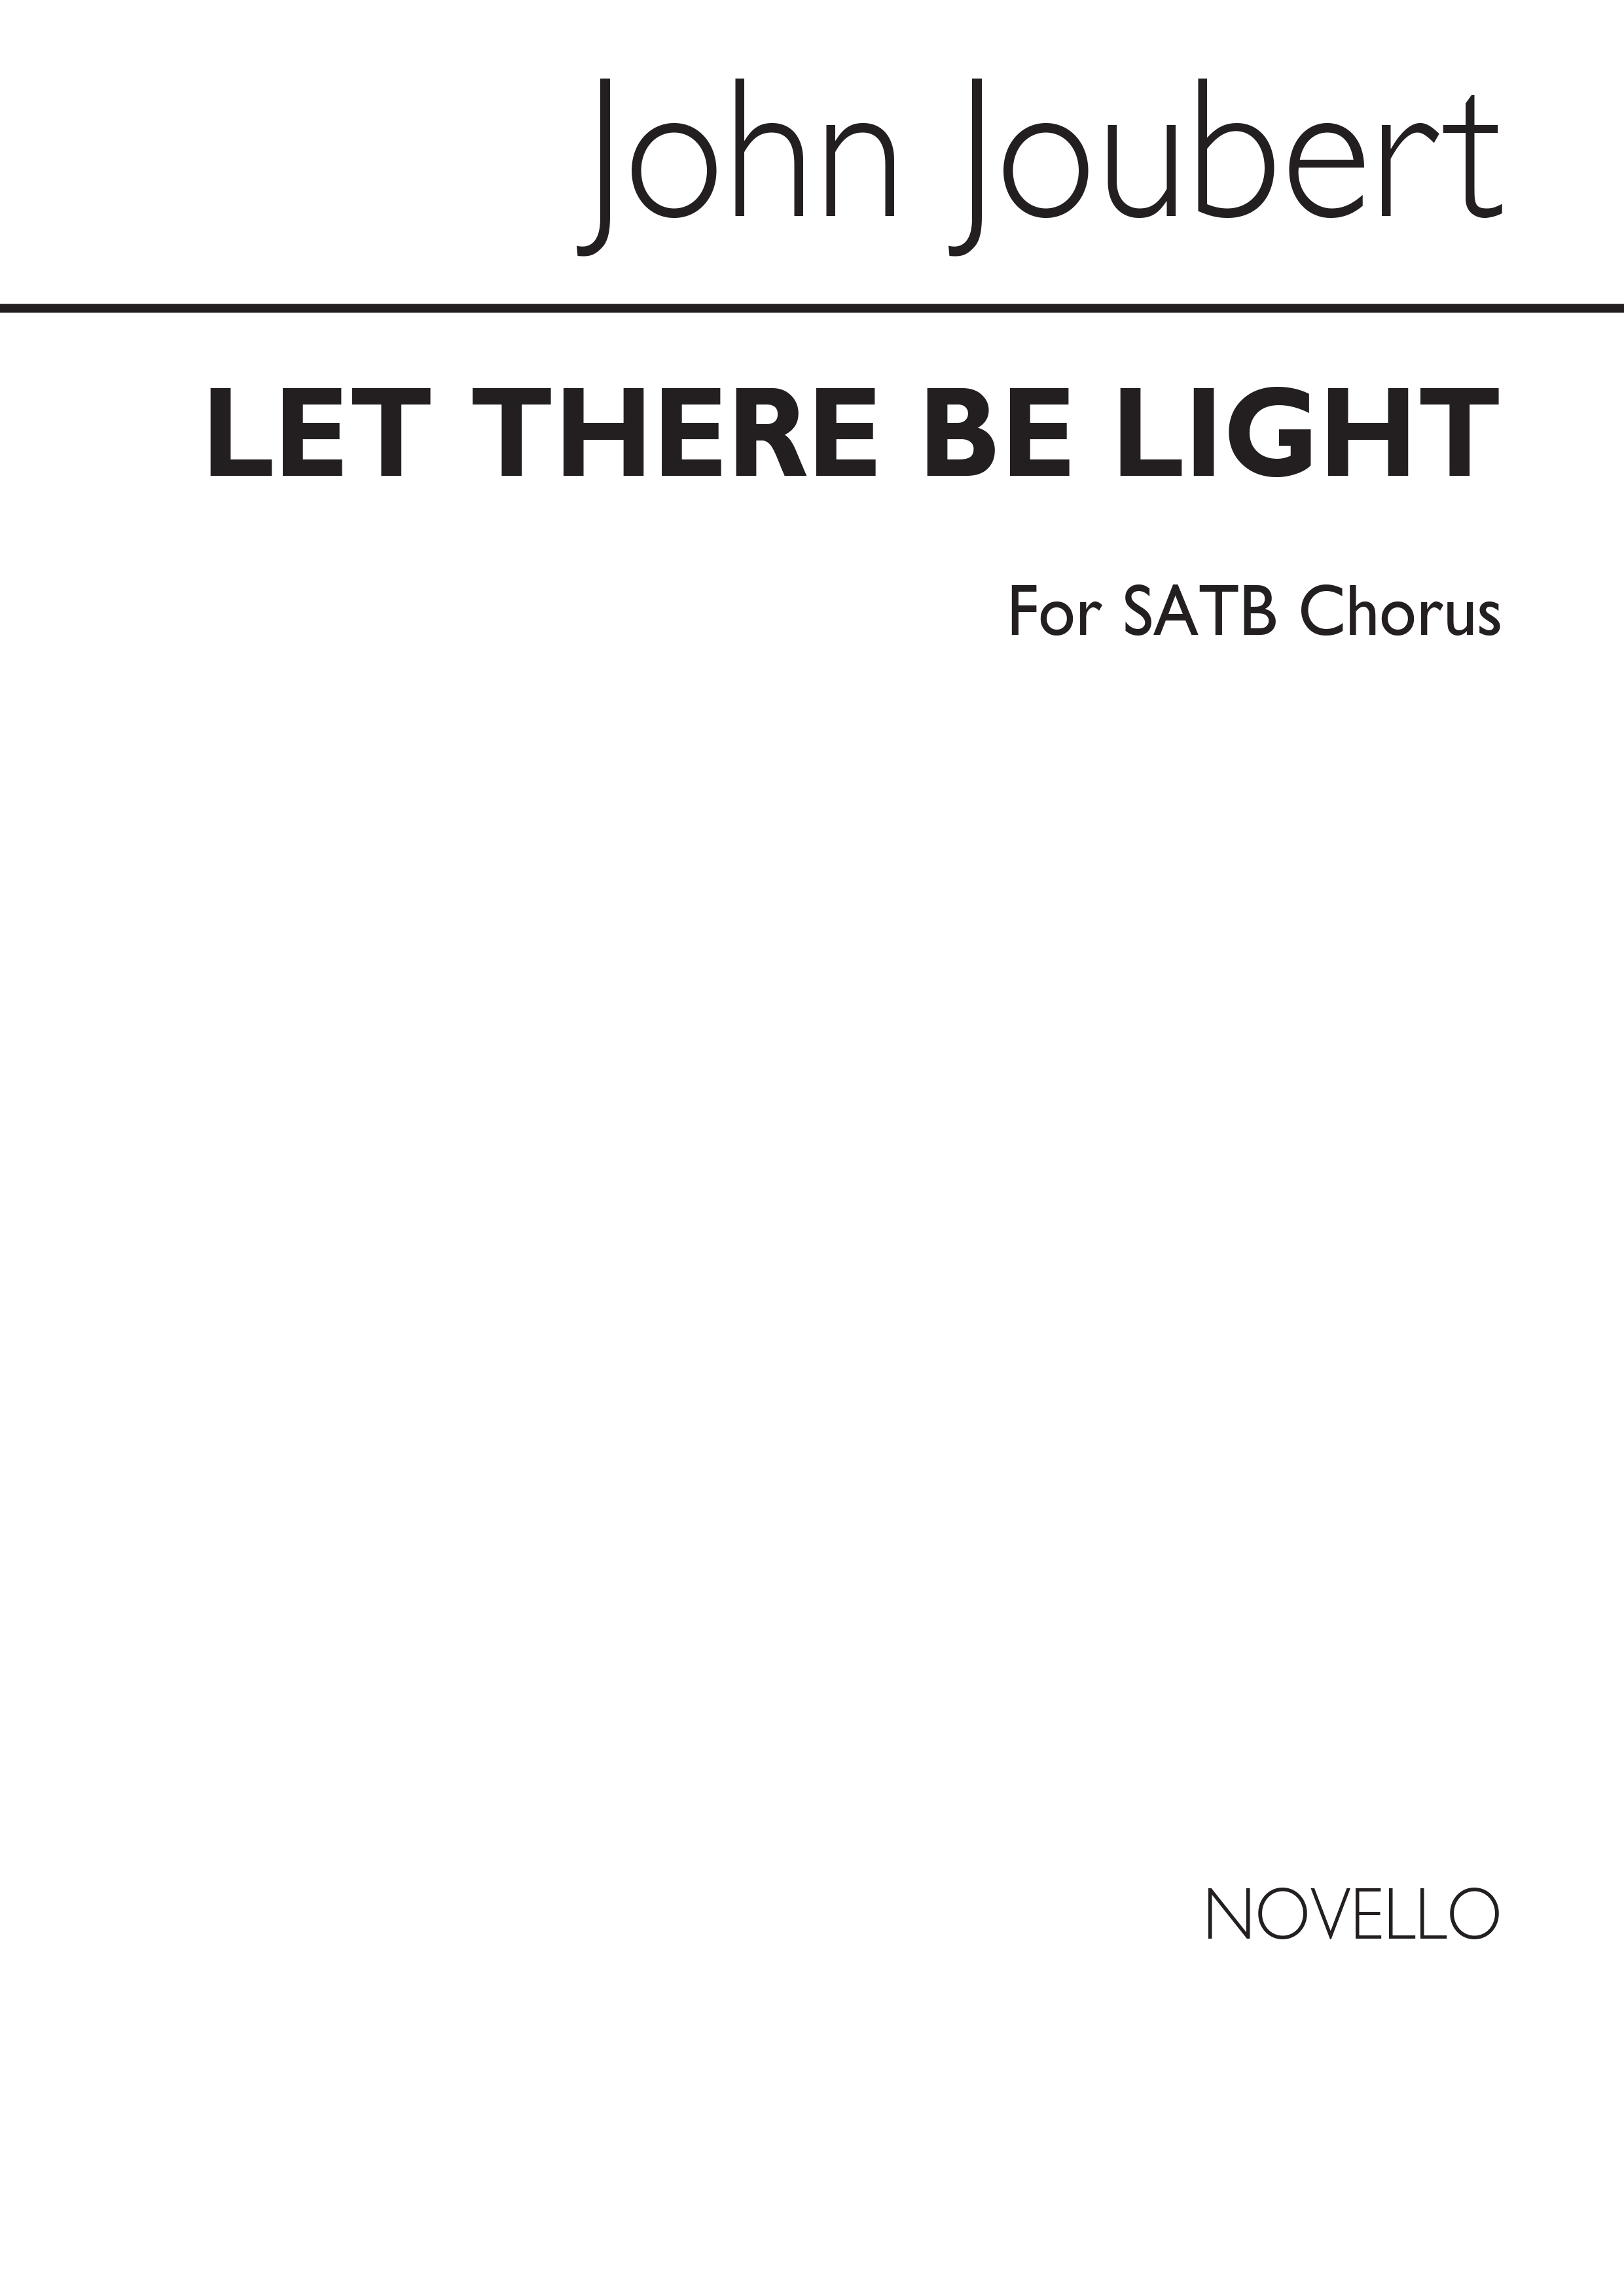 Joubert: Let There Be Light for SATB Chorus